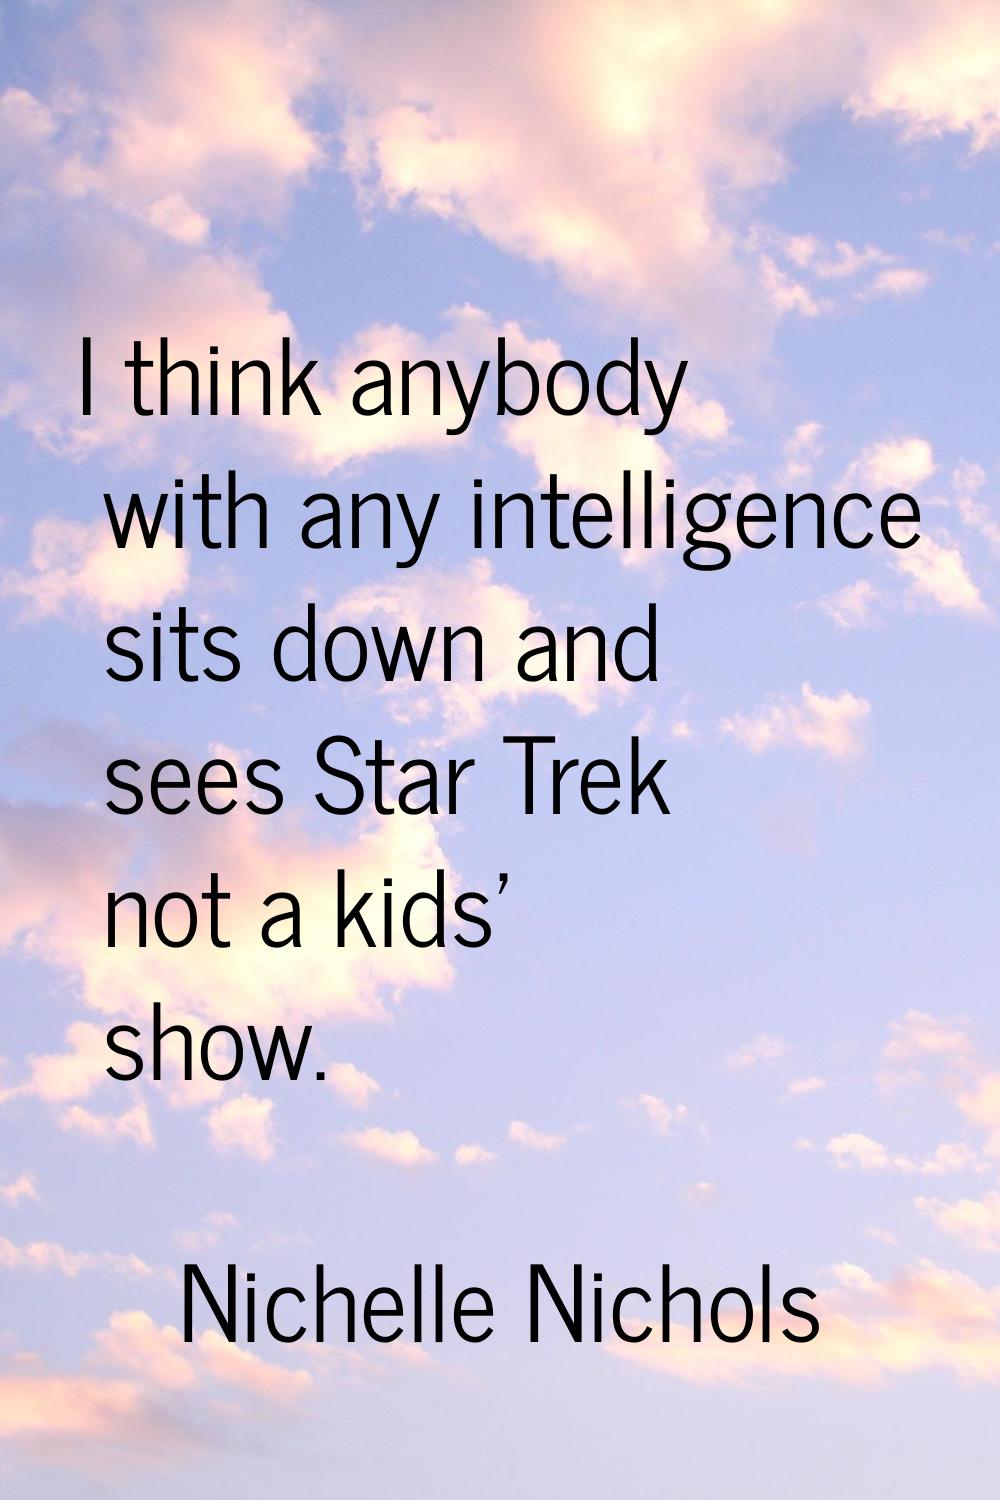 I think anybody with any intelligence sits down and sees Star Trek not a kids' show.